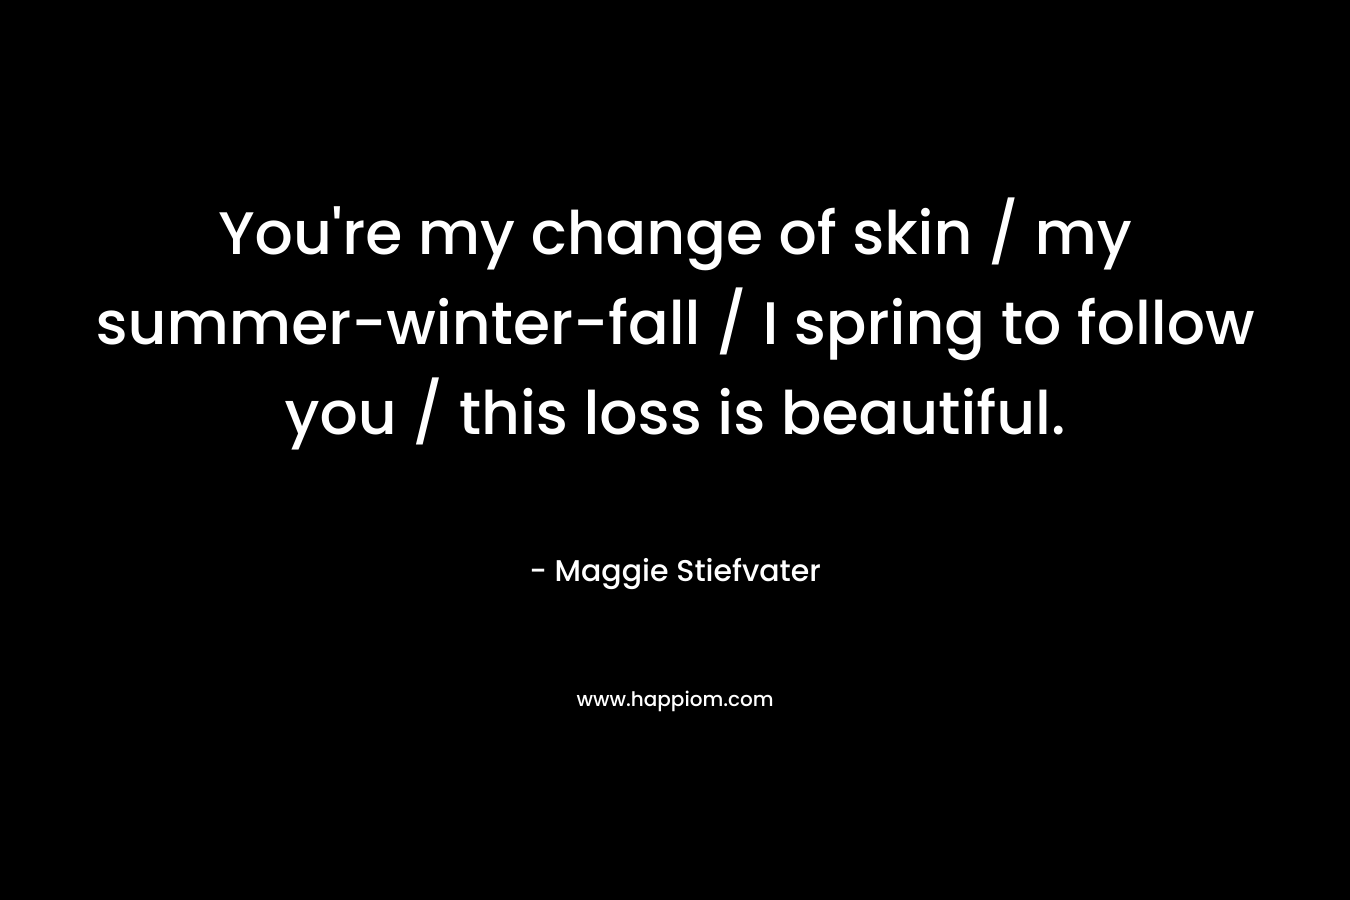 You’re my change of skin / my summer-winter-fall / I spring to follow you / this loss is beautiful. – Maggie Stiefvater